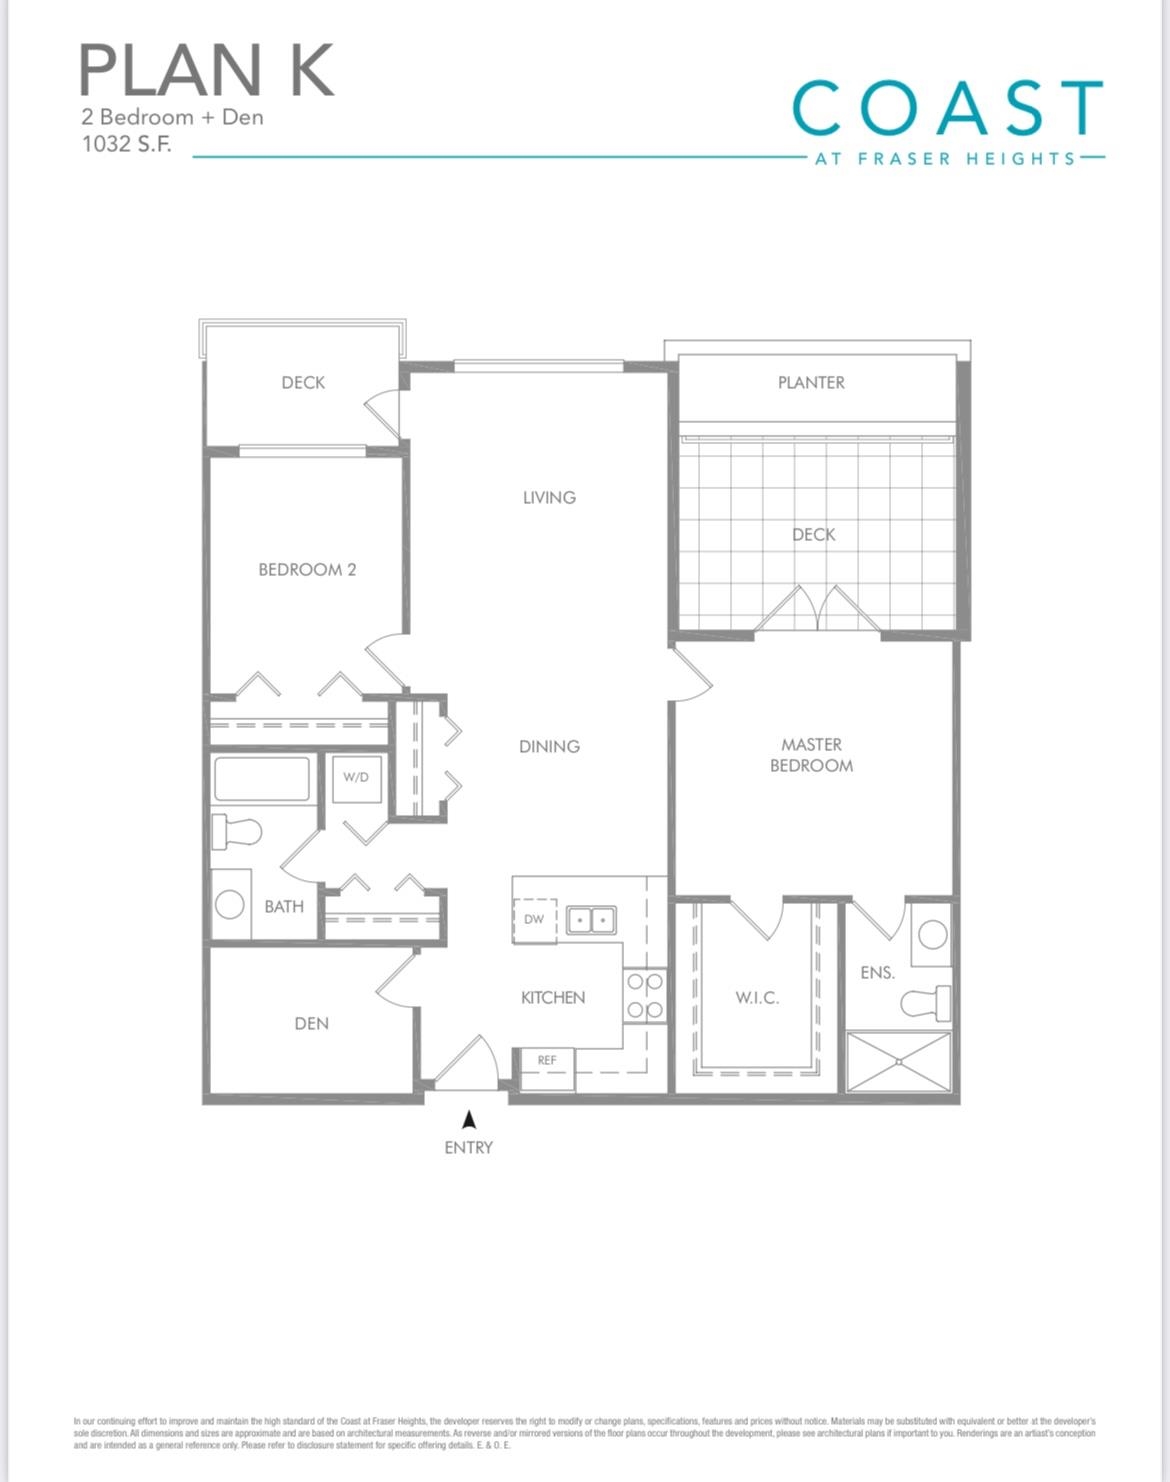 204 Floor Plan of COAST at Fraser Heights Condos with undefined beds